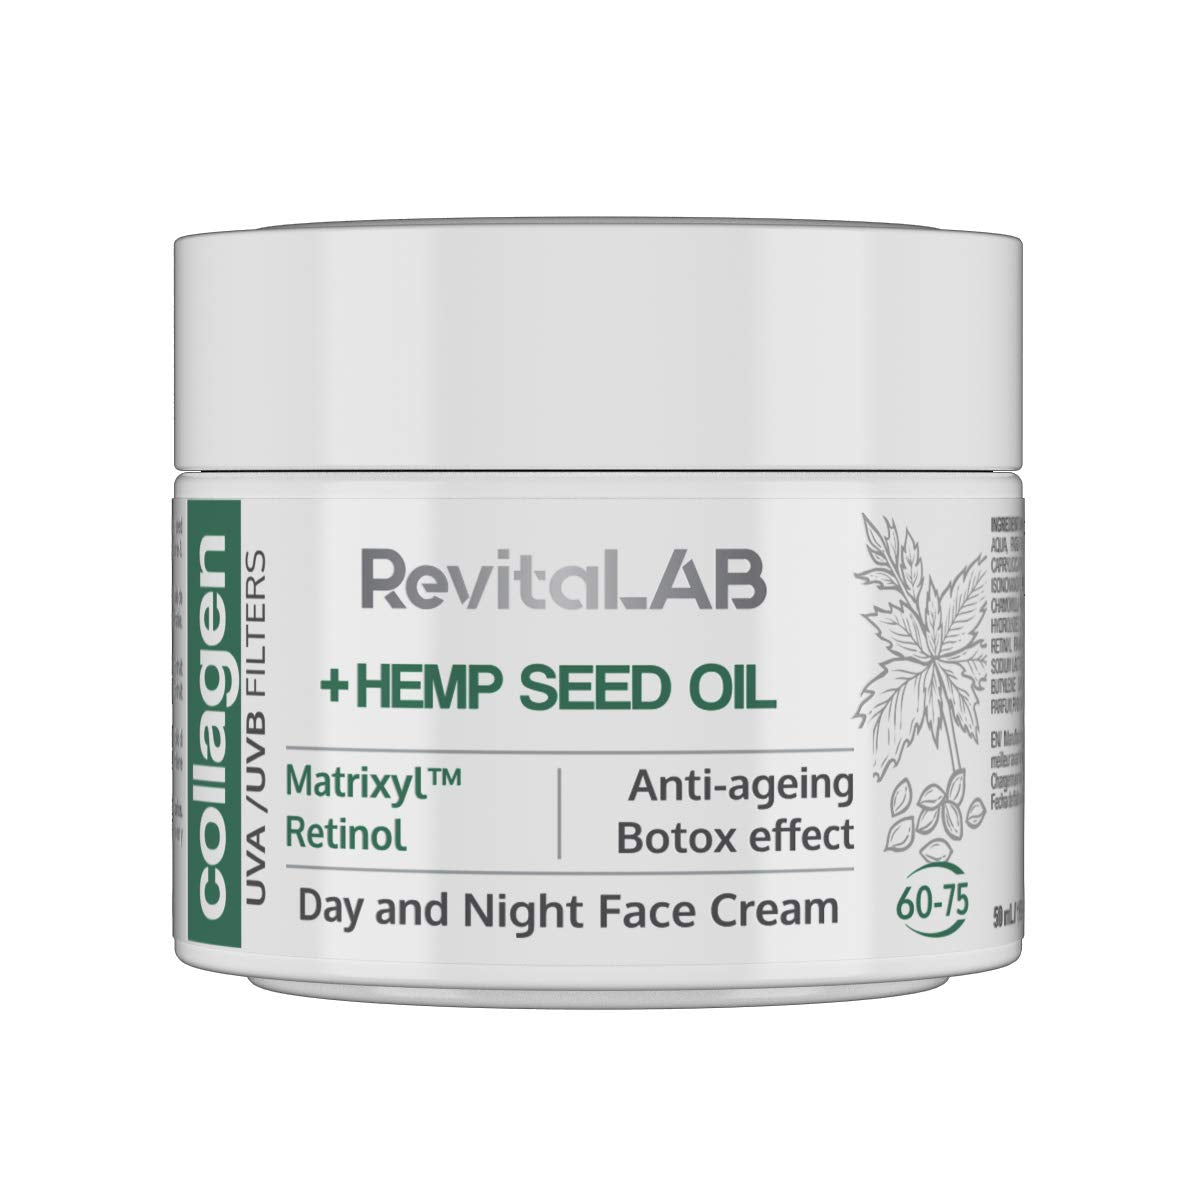 RevitaLAB Day and Night Collagen Anti-Ageing Moisturiser, Enriched with Hyaluronic Acid, Matrixyl® 3000, Hemp Seed Oil and a UVA/UVB Filter, for Ages 60 - 75, 50 ml